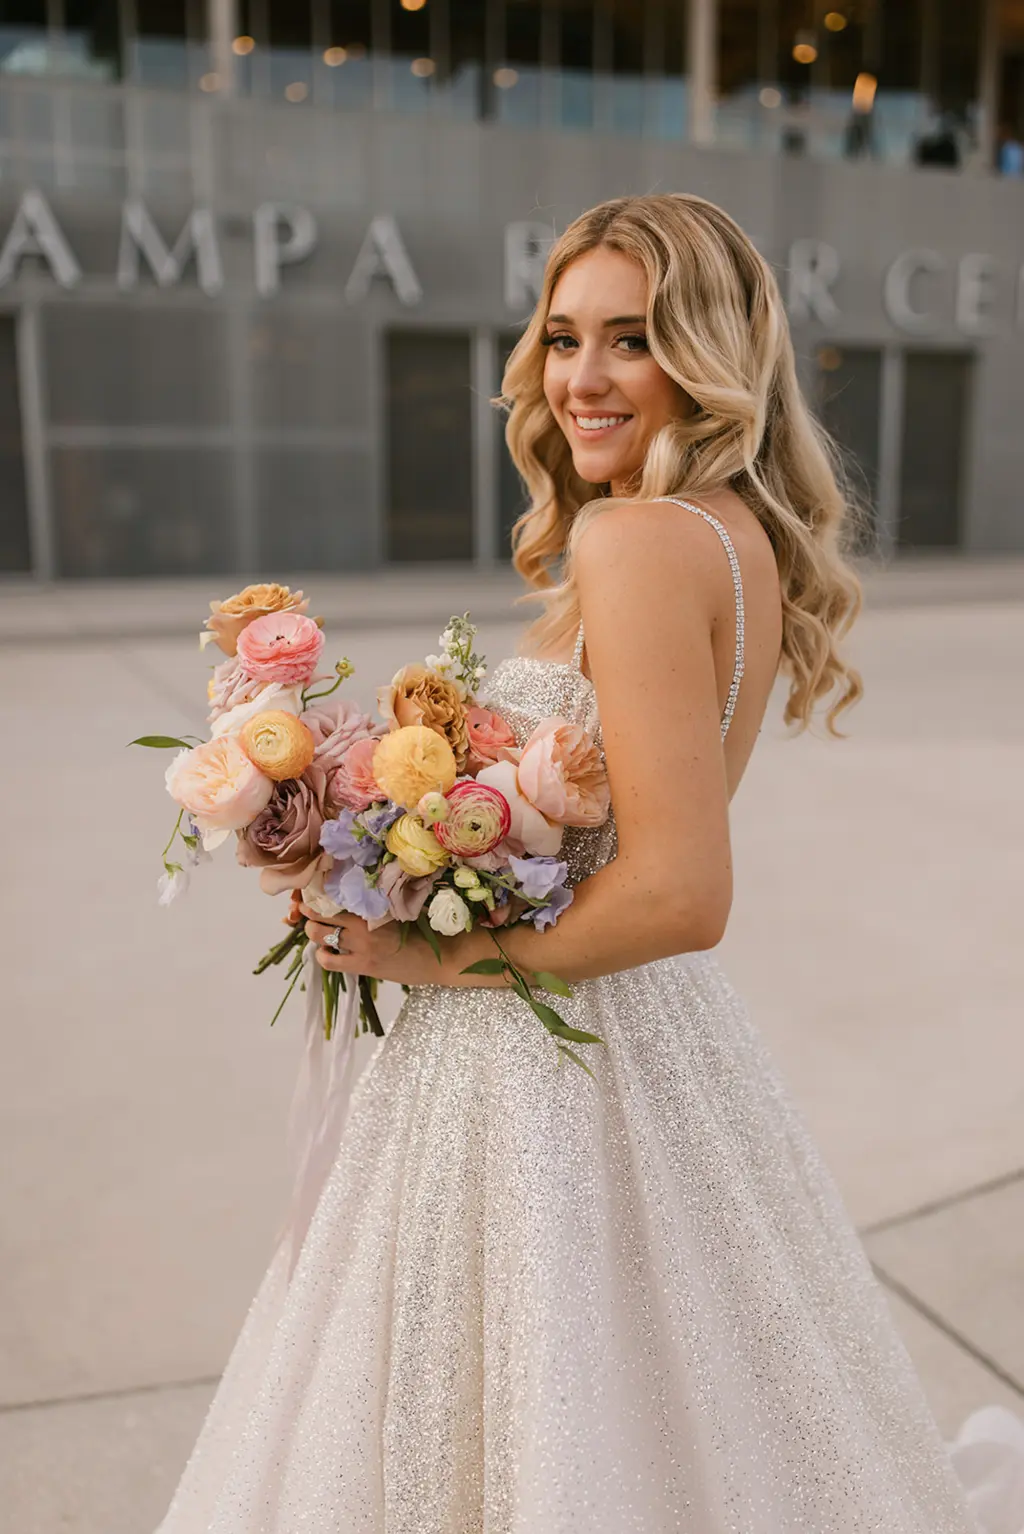 Spring Wedding Bridal Bouquet Inspiration with Pastel Orange and Pink Roses, Greenery, Gerpom, and Carnations | Glitter Boned Bodice A-Line Berta Wedding Dress Ideas | Classic Wedding Hair and Makeup Ideas | Tampa Bay Hair and Makeup Artist Femme Akoi Beauty Studio